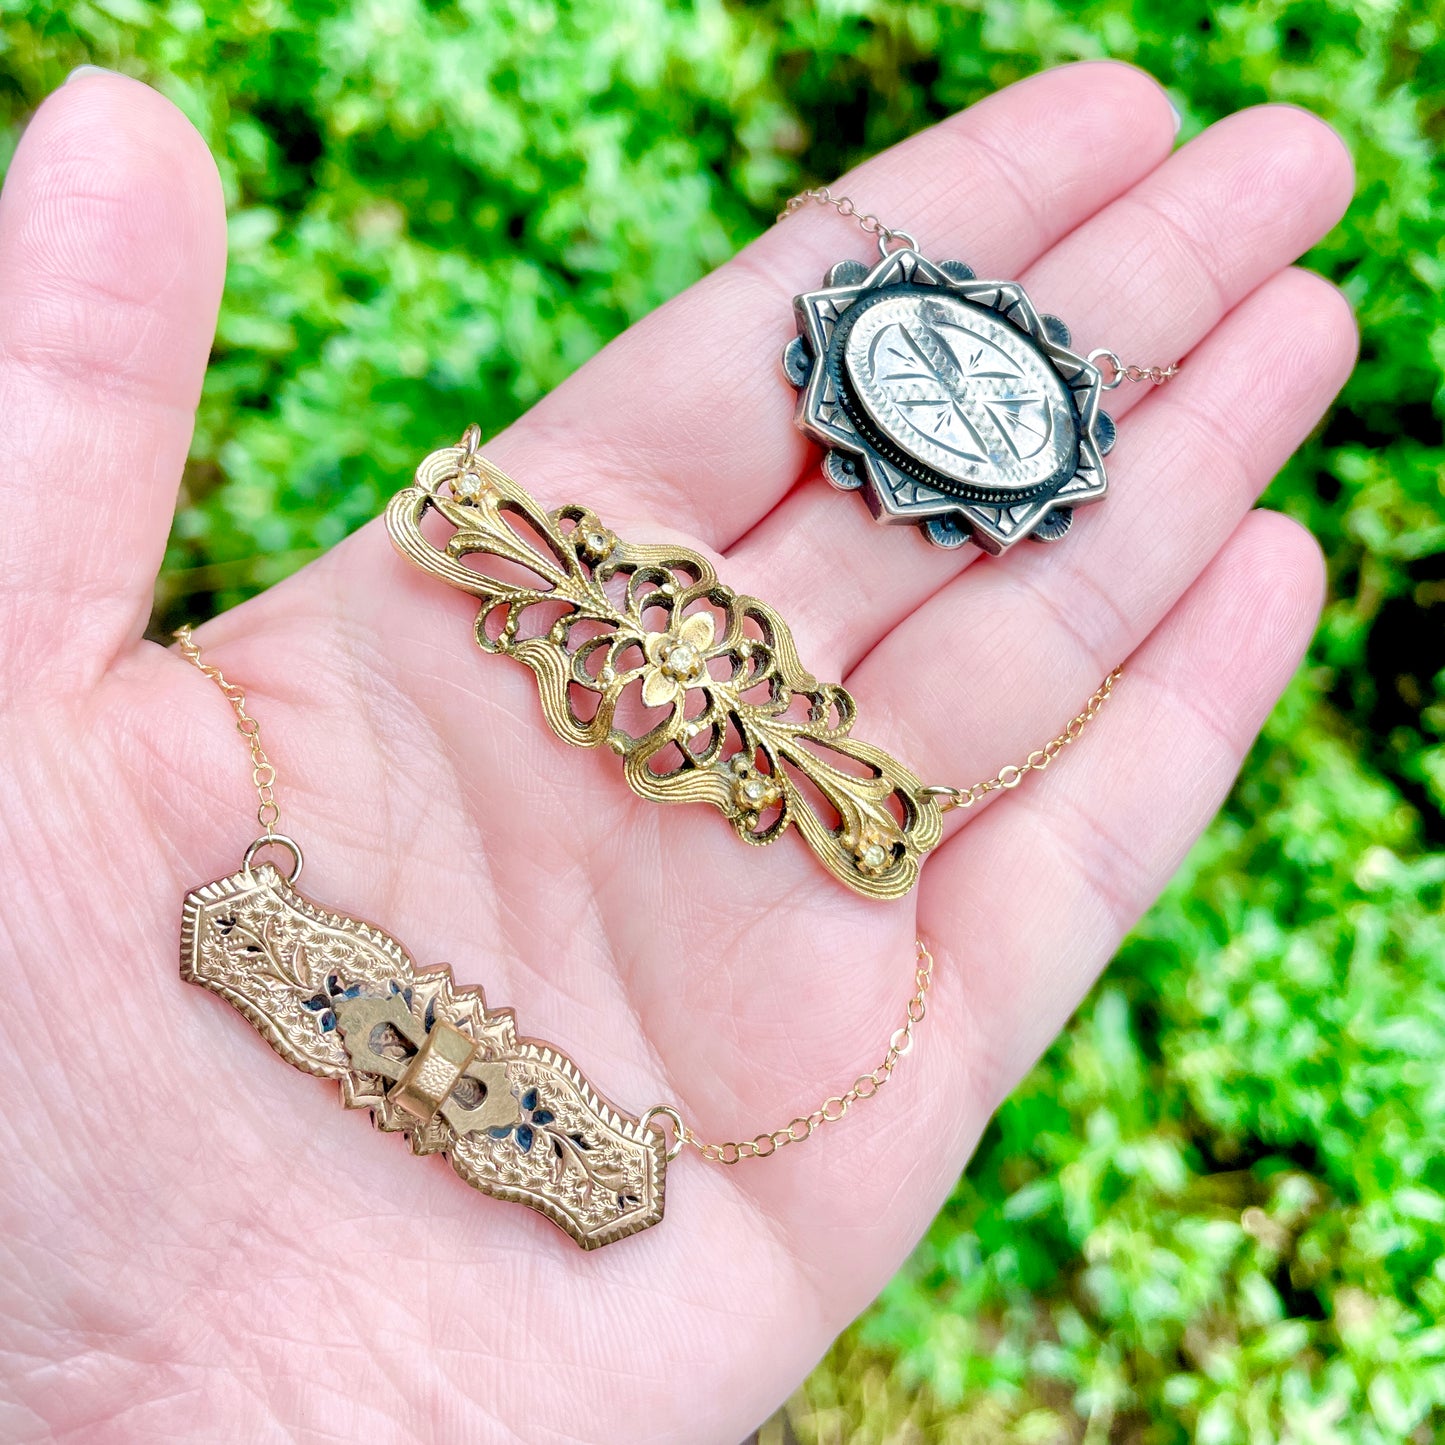 Three repurposed vintage brooch pendants laying on the palm side of a hand with green foliage in the background.